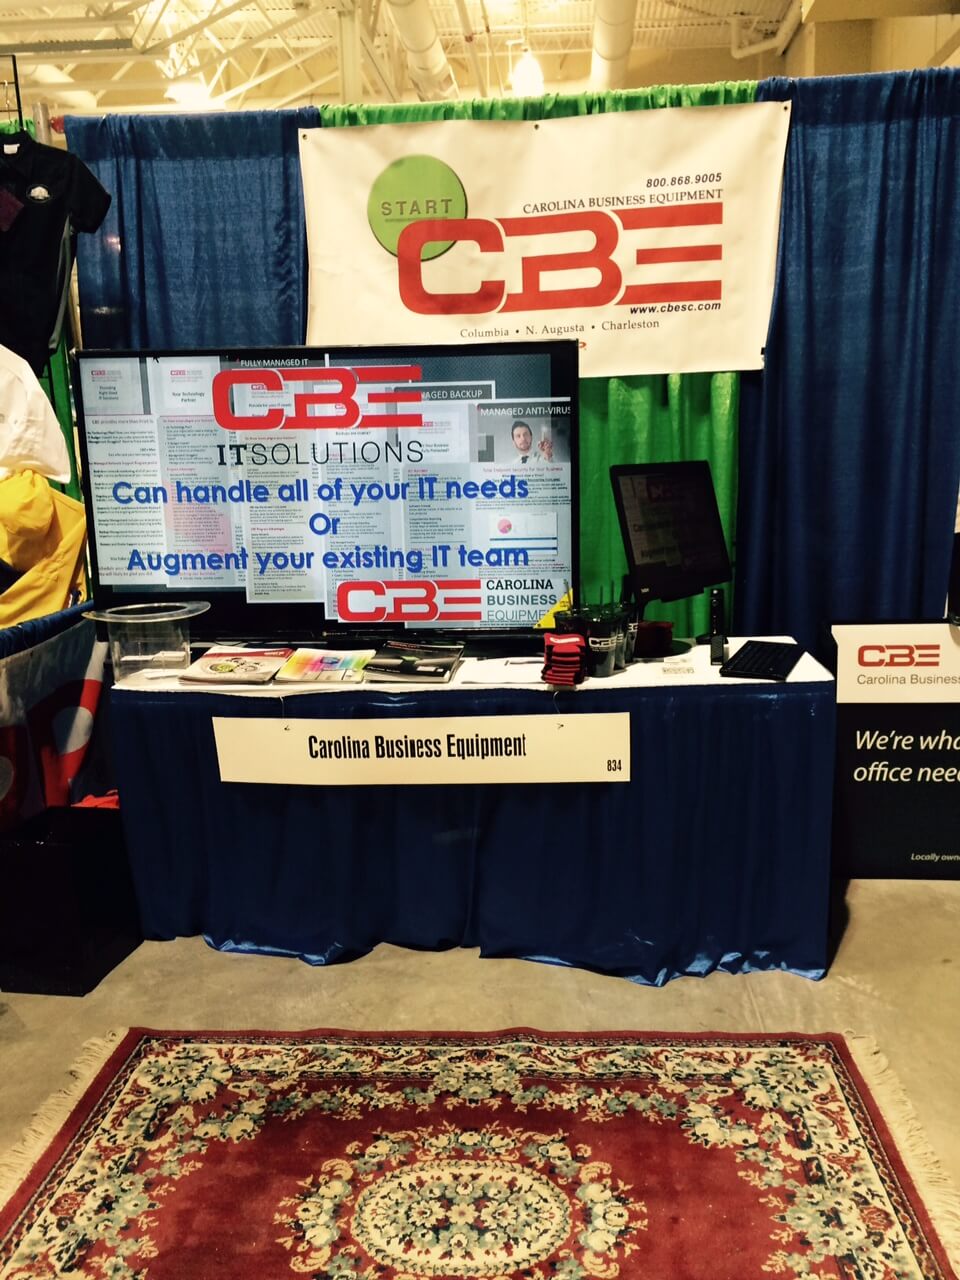 CBE booth at the North Charleston Business Conference and Expo